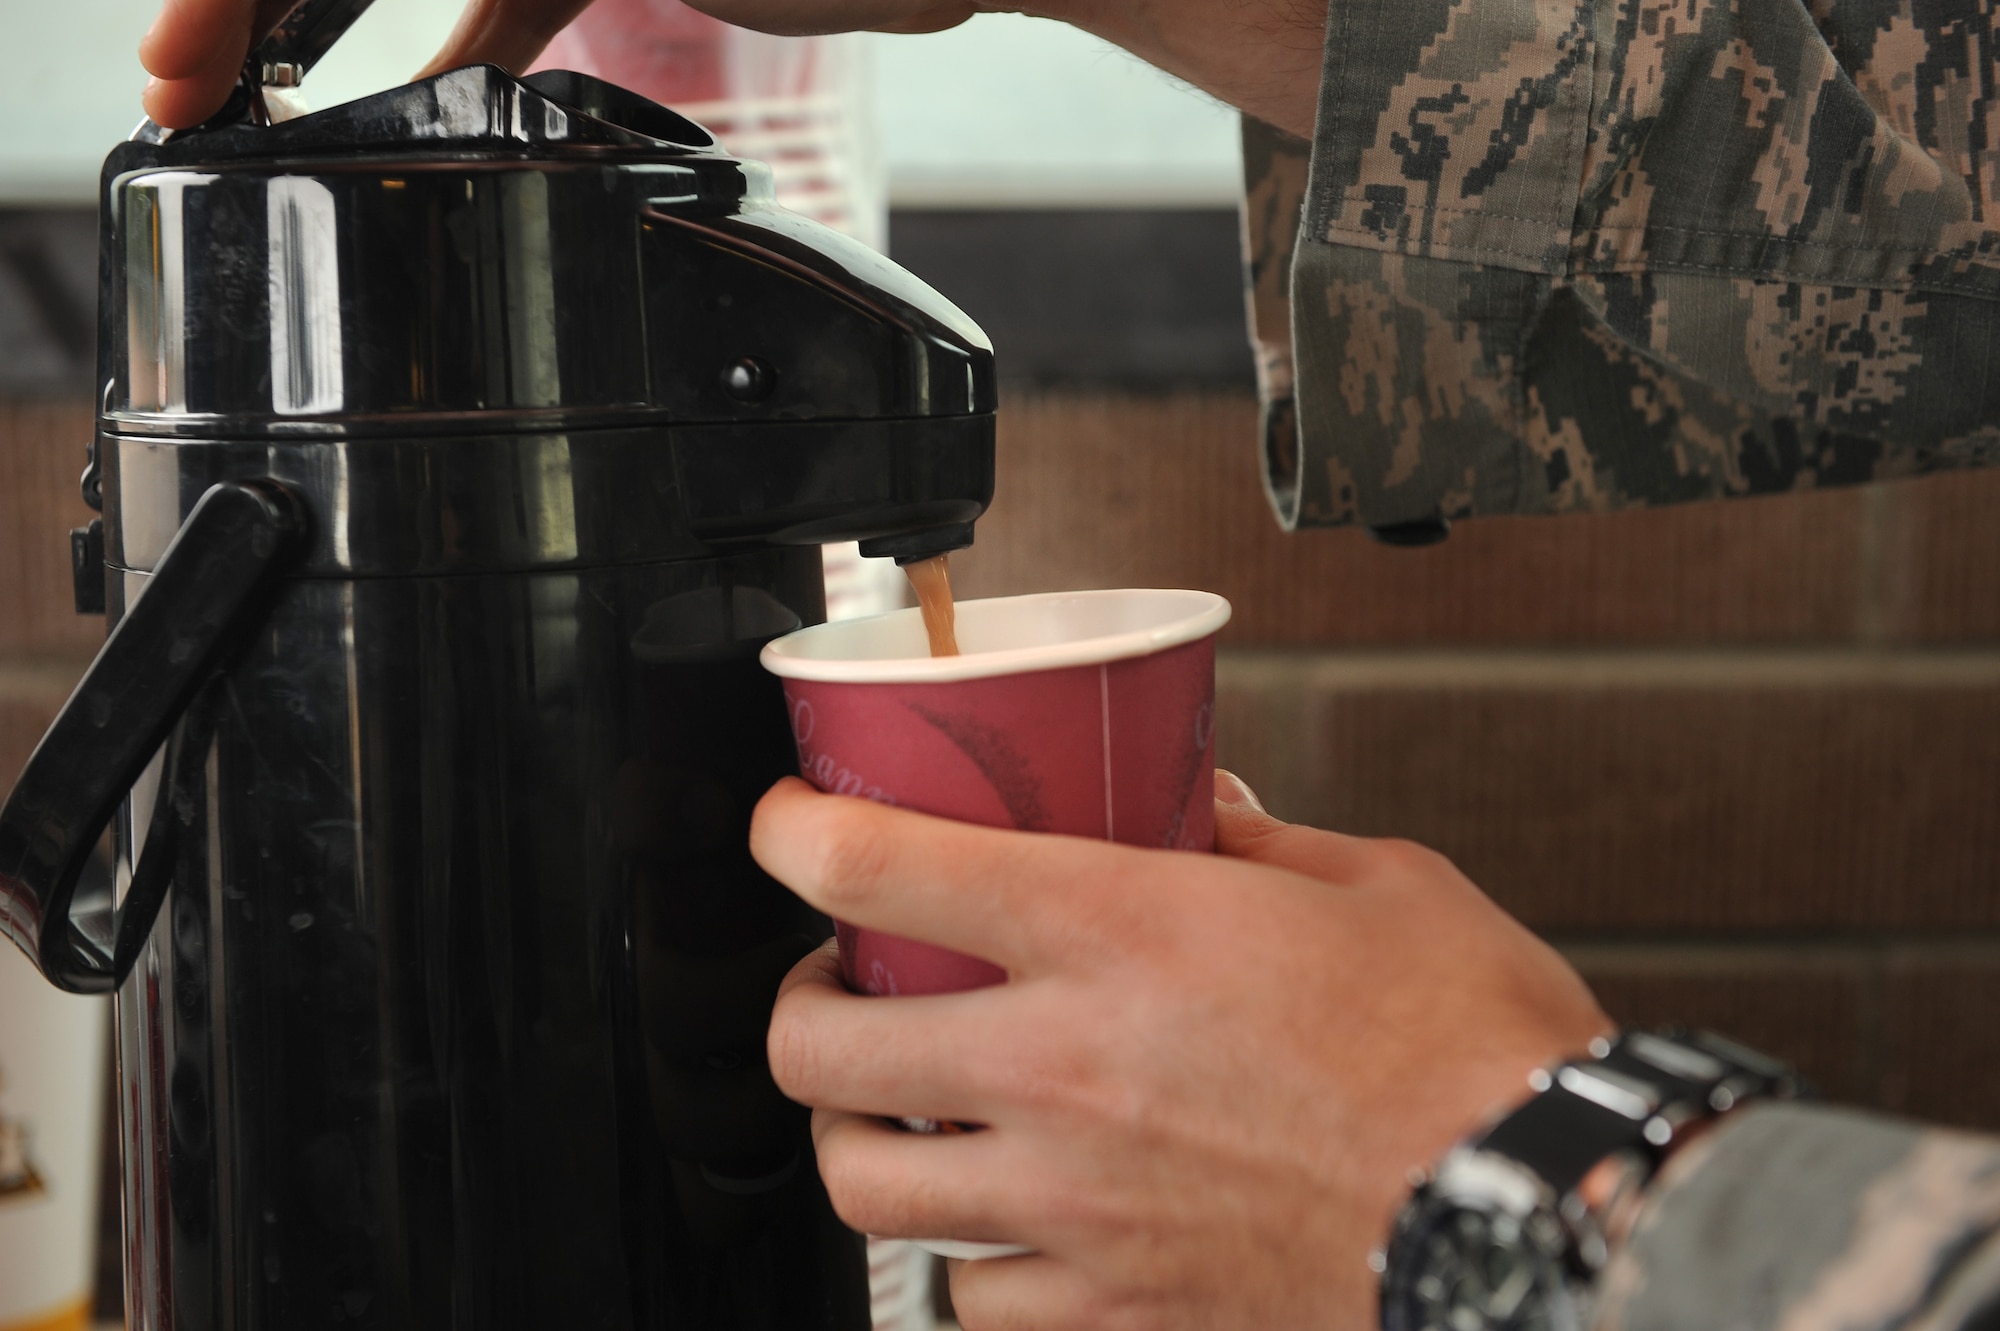 U.S. Air Force Staff Sgt. George Mena, 355th Fighter Wing chaplain’s assistant, pours hot chocolate at Davis-Monthan Air Force Base, Ariz., Dec. 14, 2015. Mena brought cups of hot chocolate to Airmen at entry control points around D-M. Visits like this are part of the Chaplain’s weekly routine to check on D-M’s Airmen. (U.S. Air Force photo by Senior Airman Cheyenne A. Powers/ Released)

